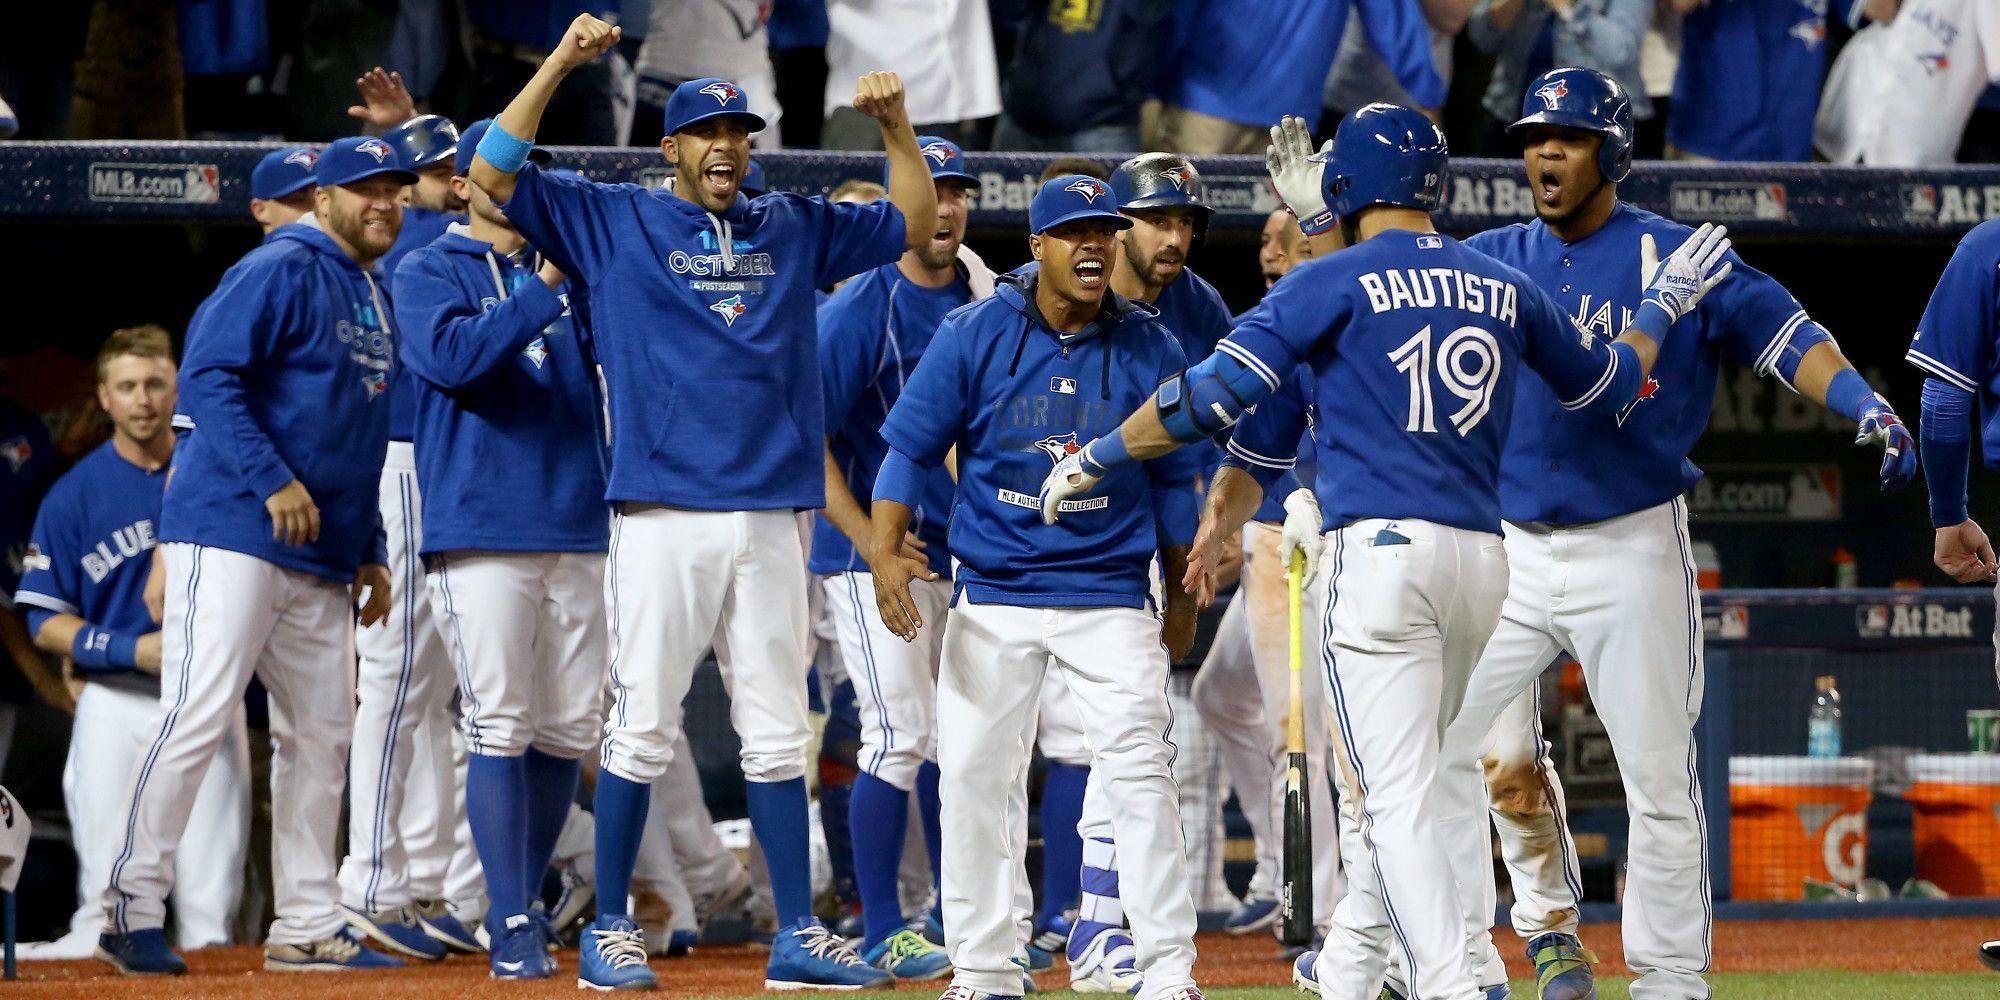 Toronto Blue Jays wallpaper HD background download Facebook Covers